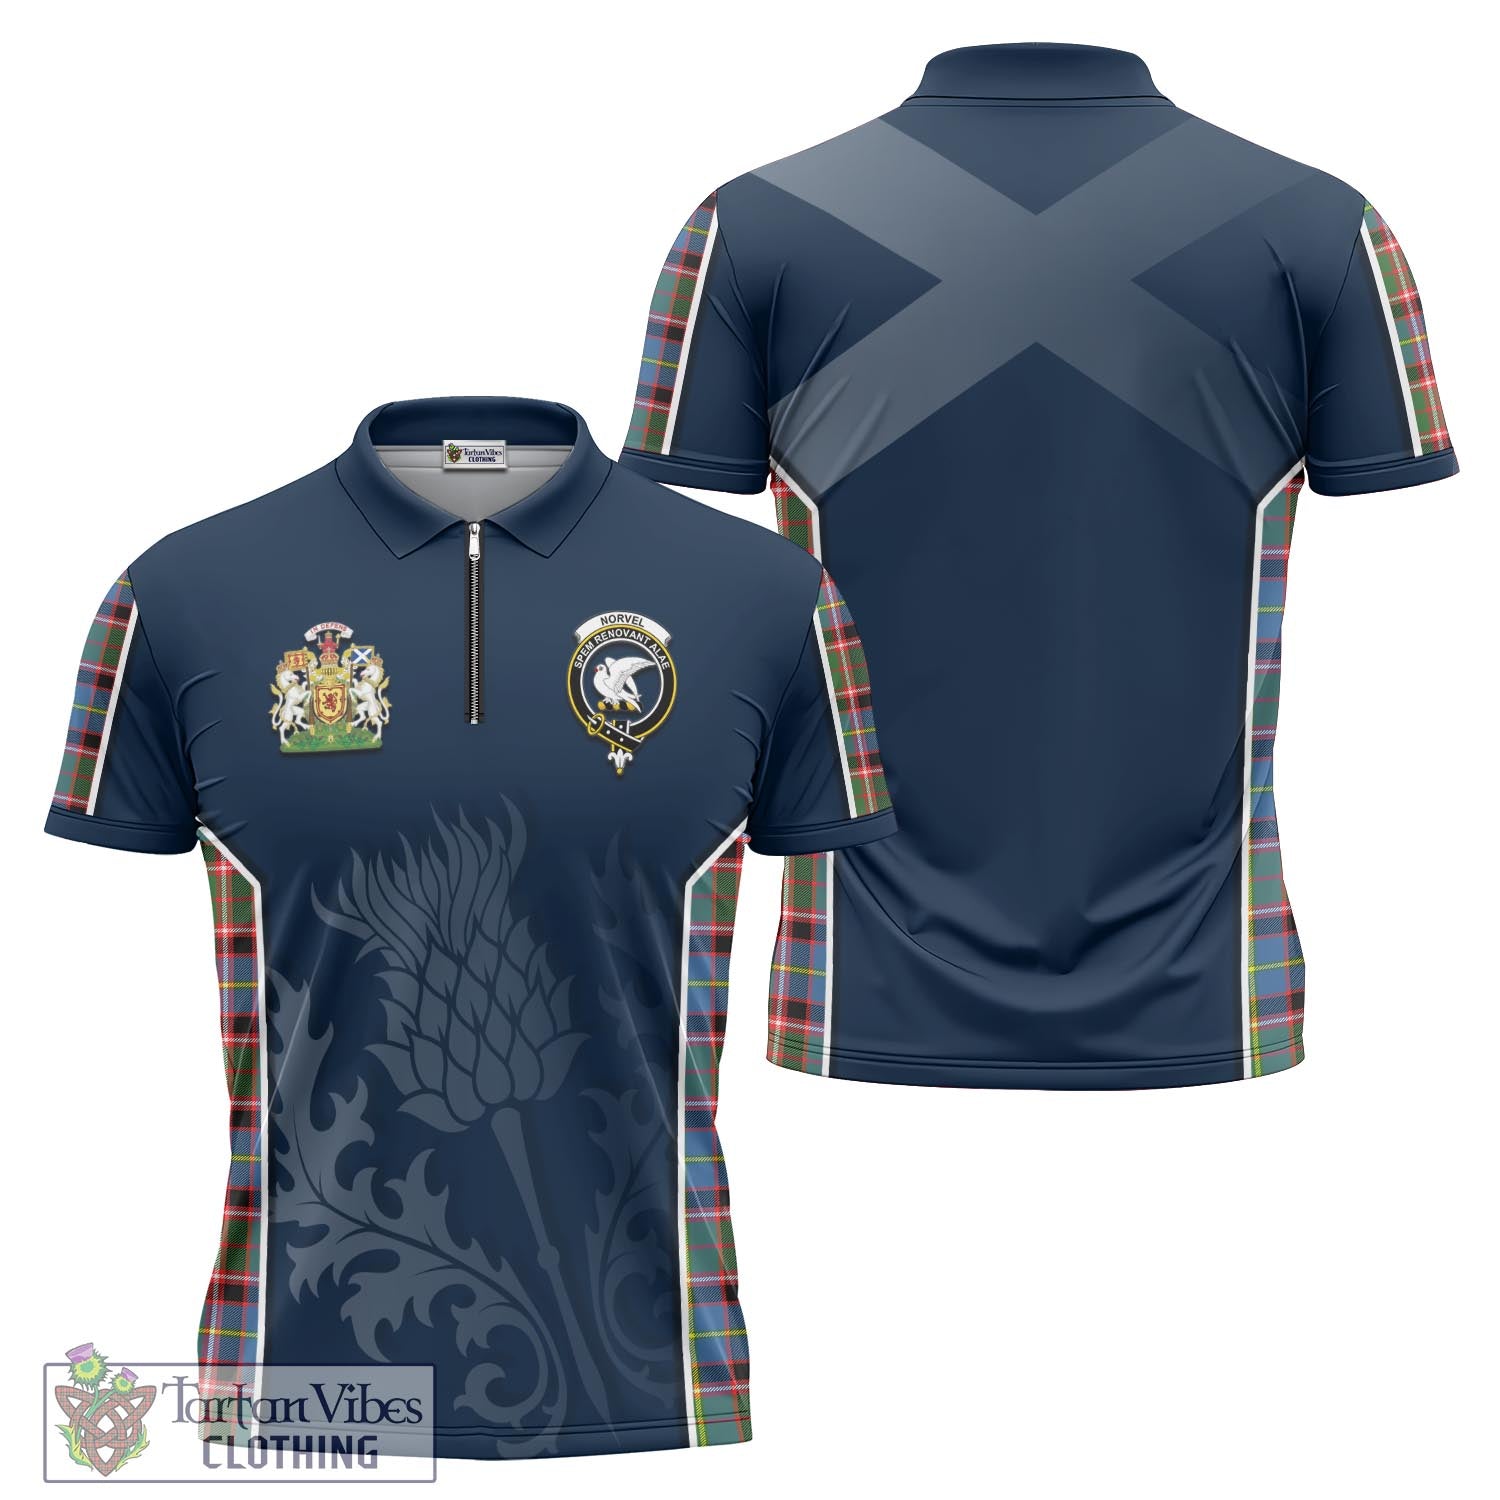 Tartan Vibes Clothing Norvel Tartan Zipper Polo Shirt with Family Crest and Scottish Thistle Vibes Sport Style